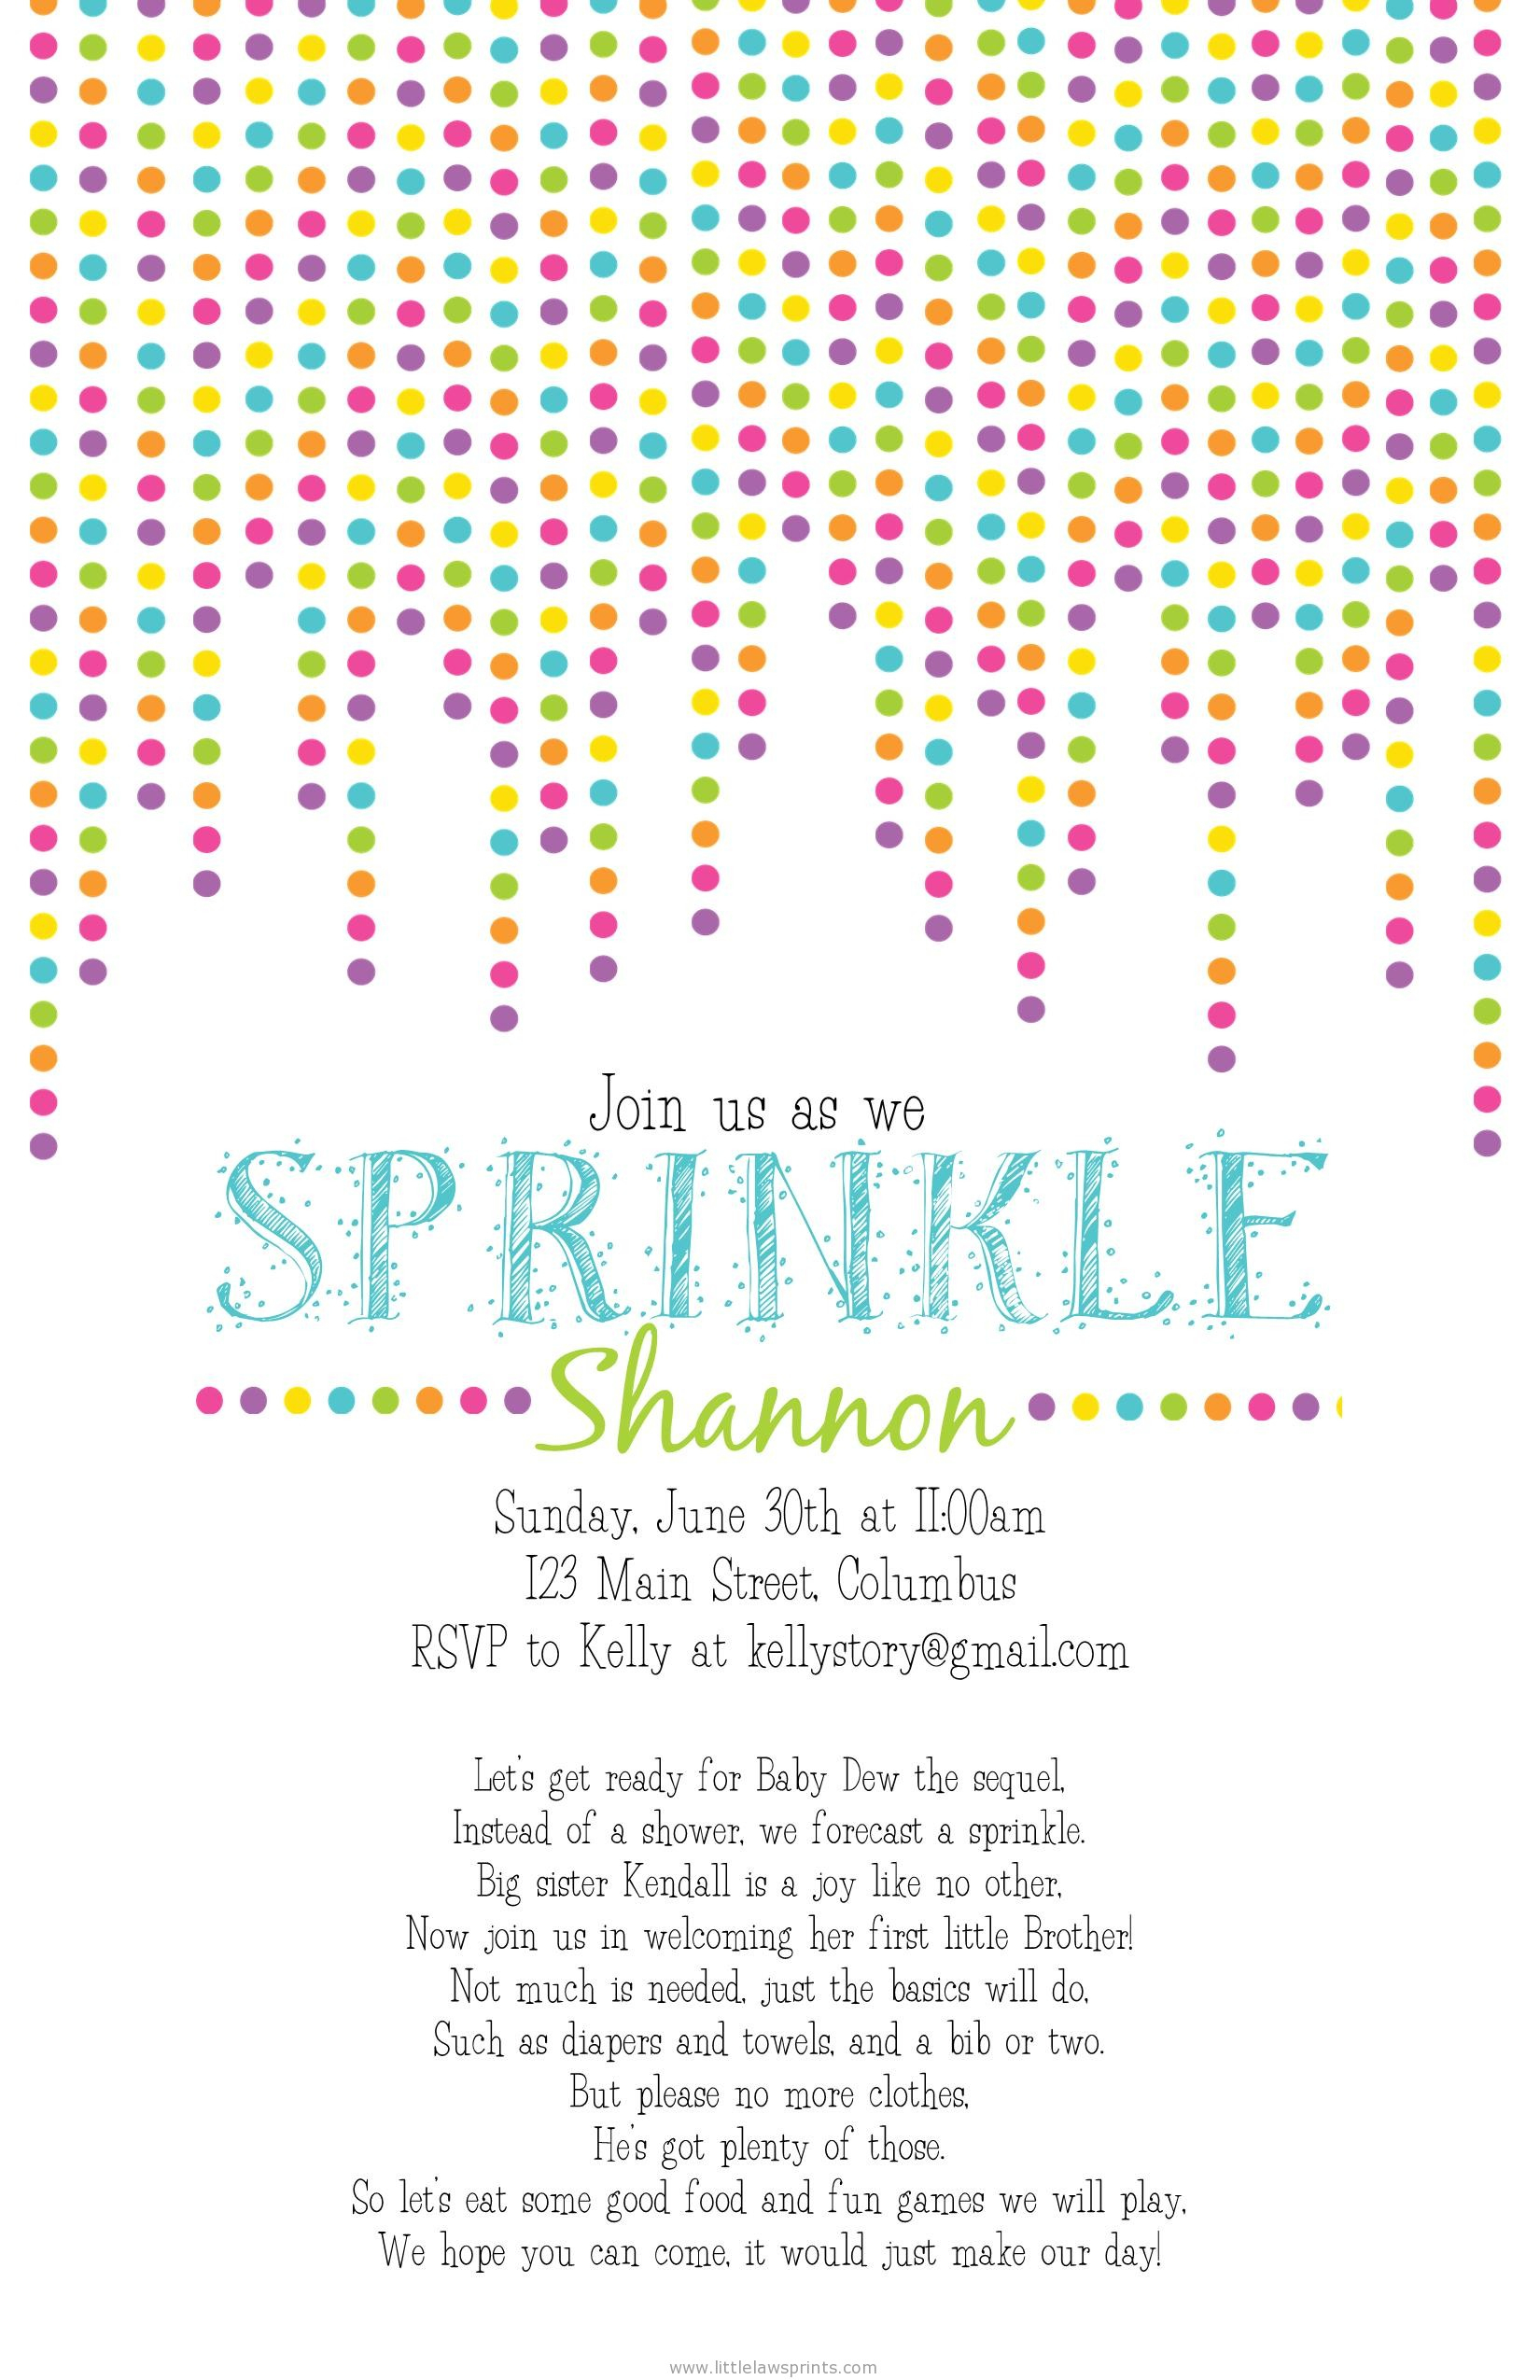 Photo : Baby Sprinkle Invitations Party Image - Free Printable Baby Sprinkle Invitations